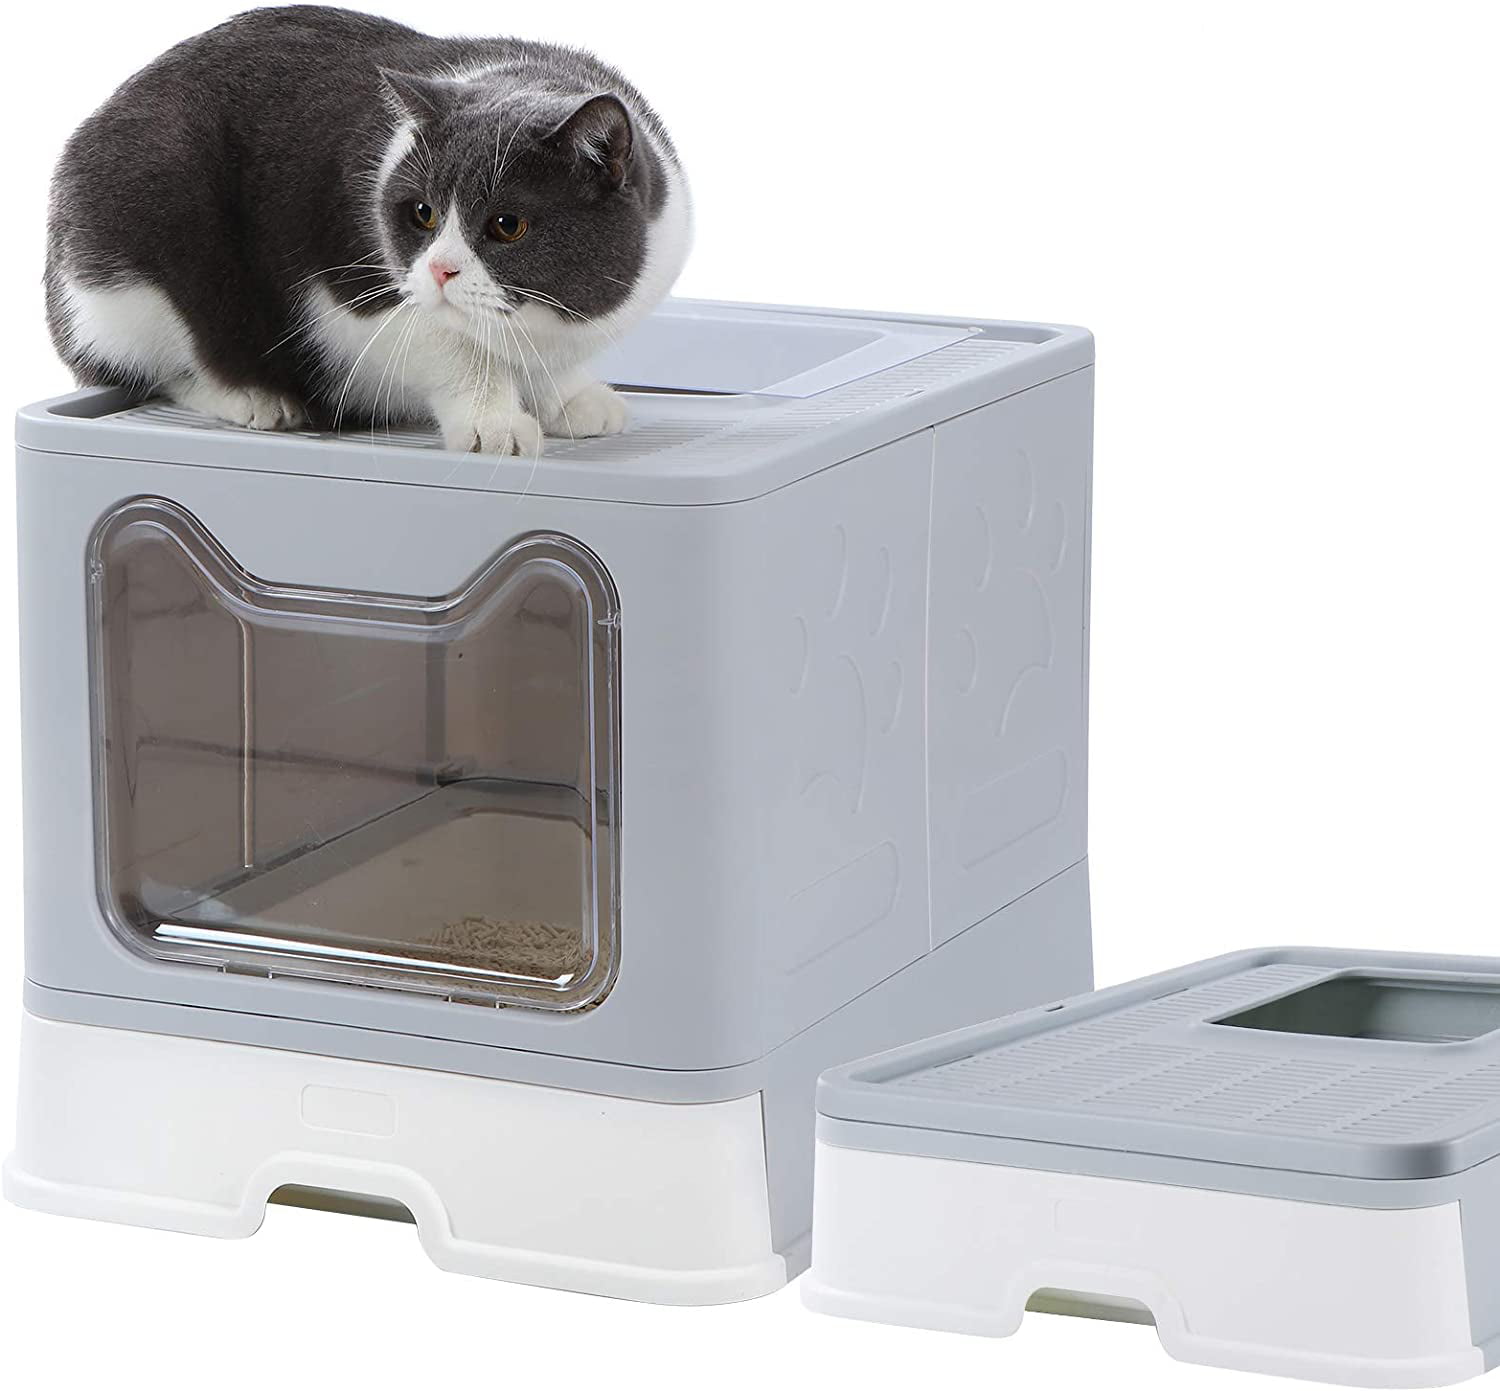 Dymoll Large Cat Litter Box, Foldable Top Entry Litter Box with Lid